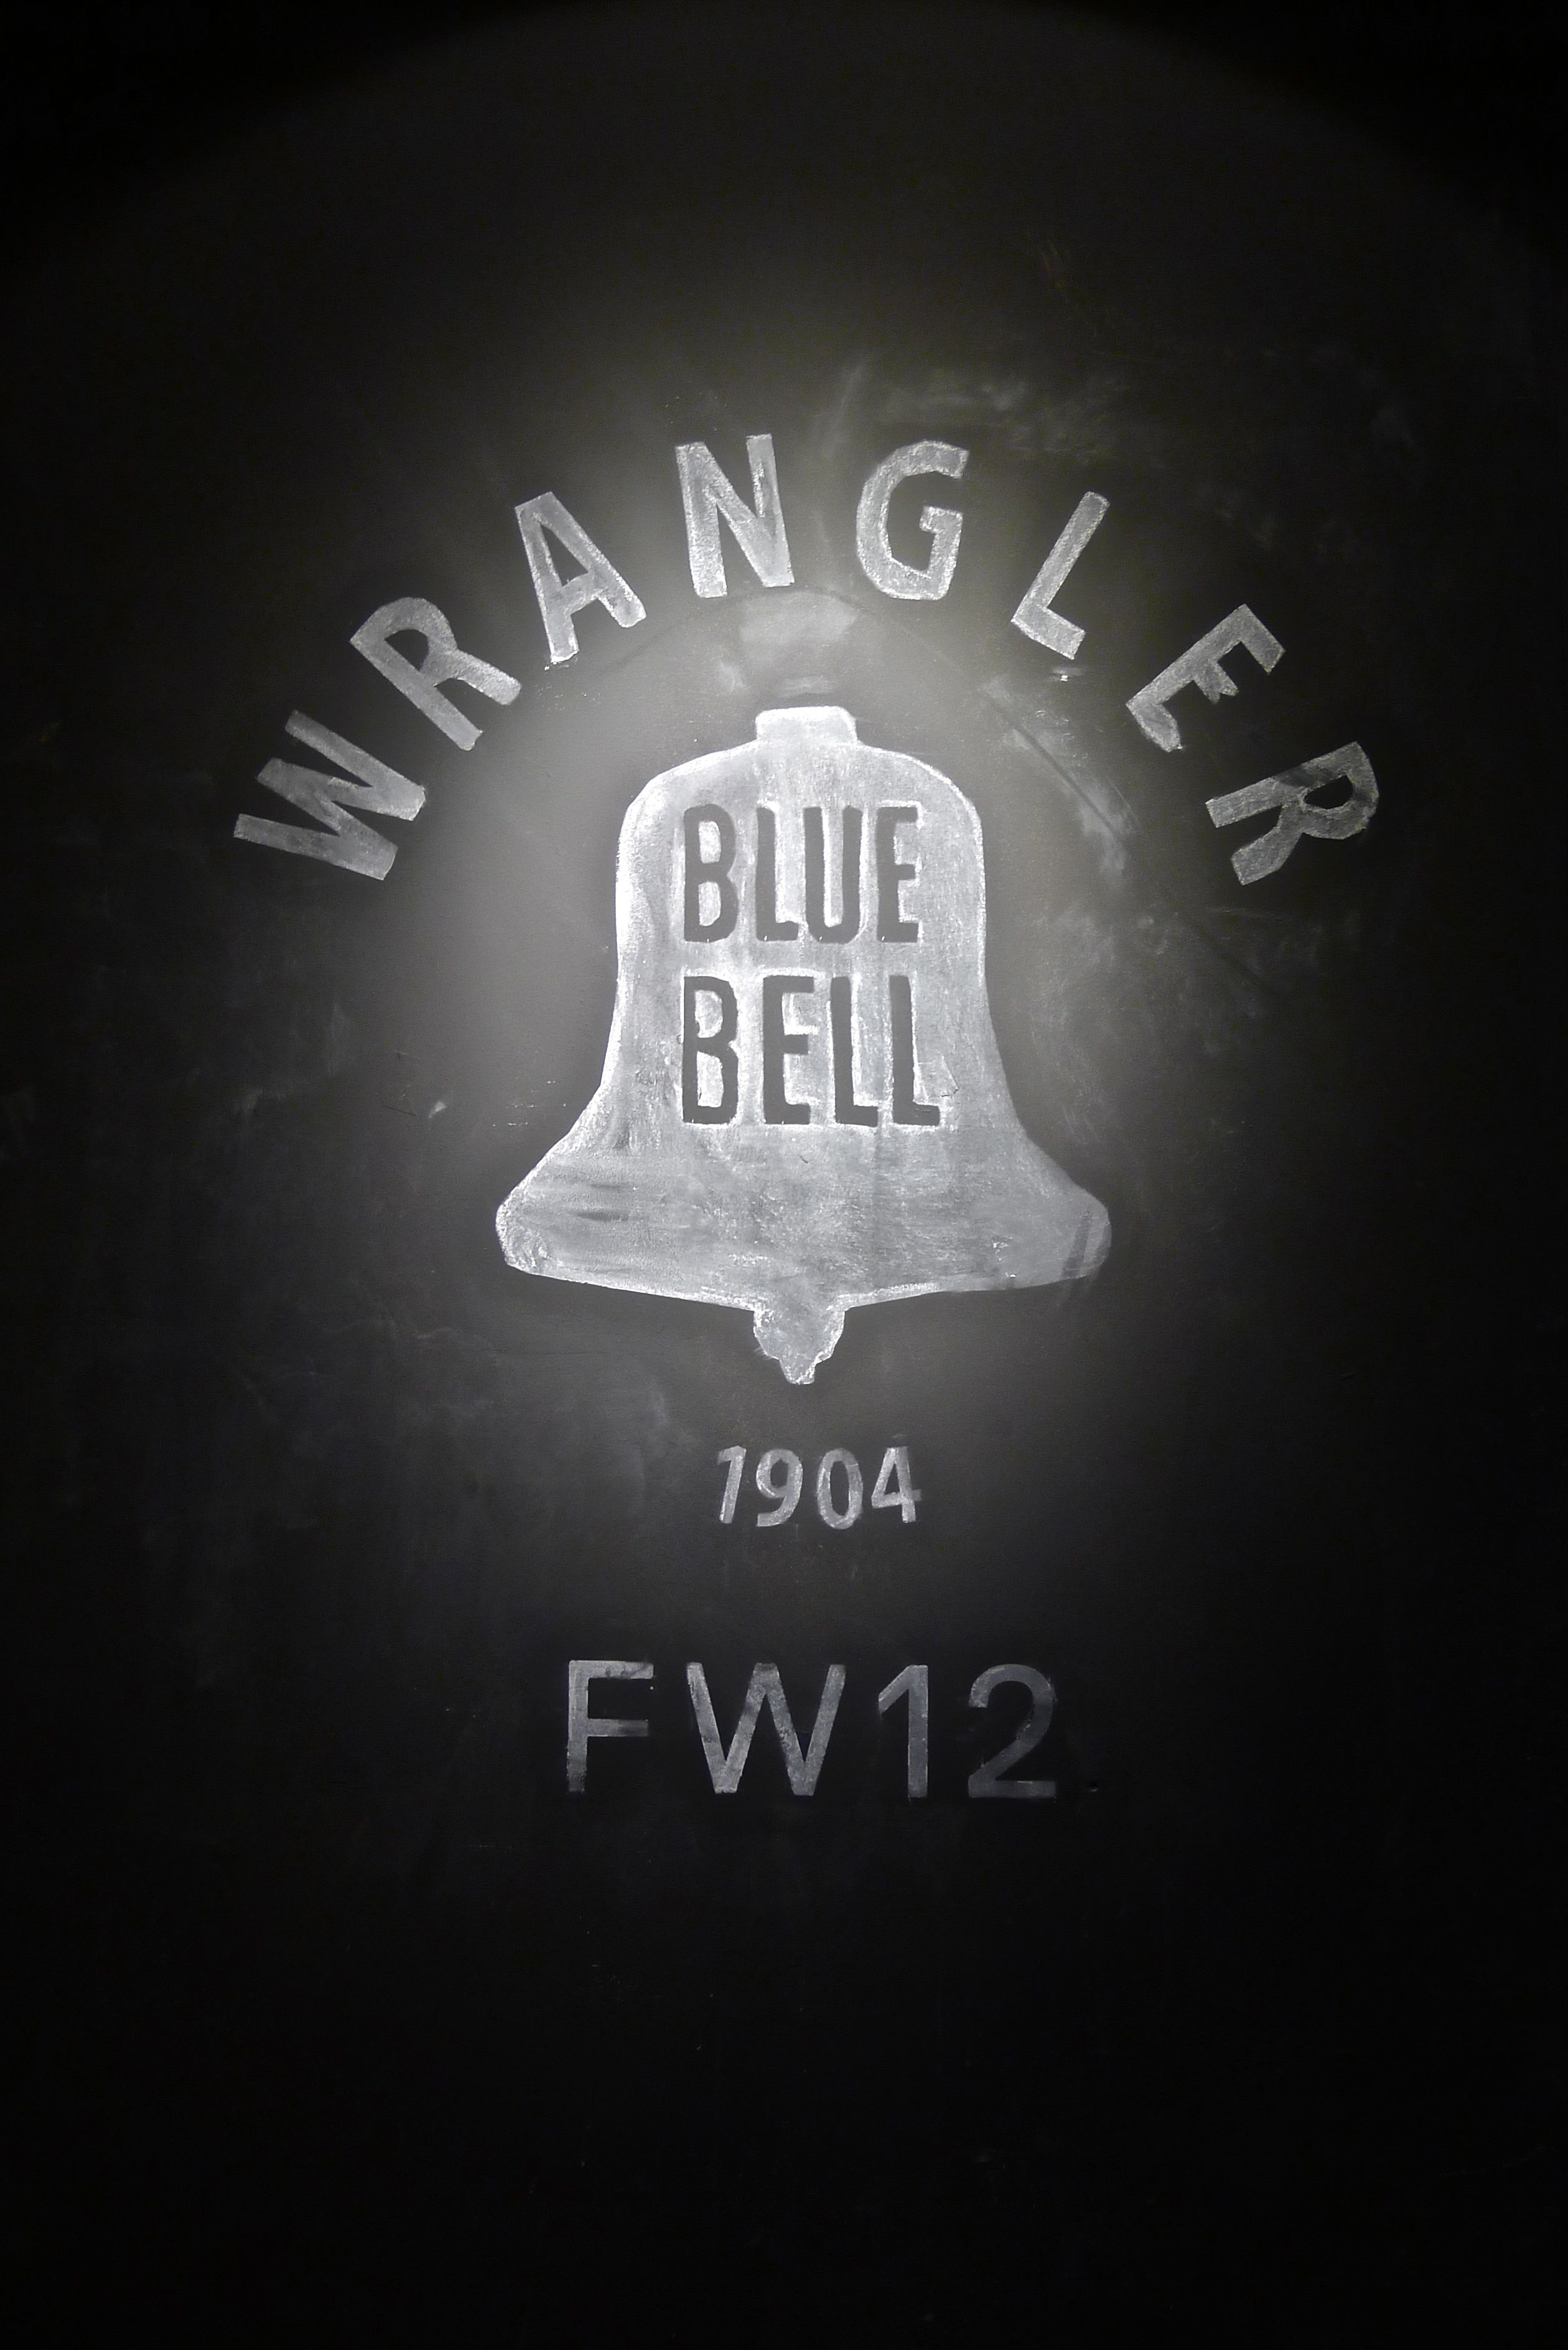 Wrangler/Blue Bell on Bread & Butter - Rope Dye Crafted Goods